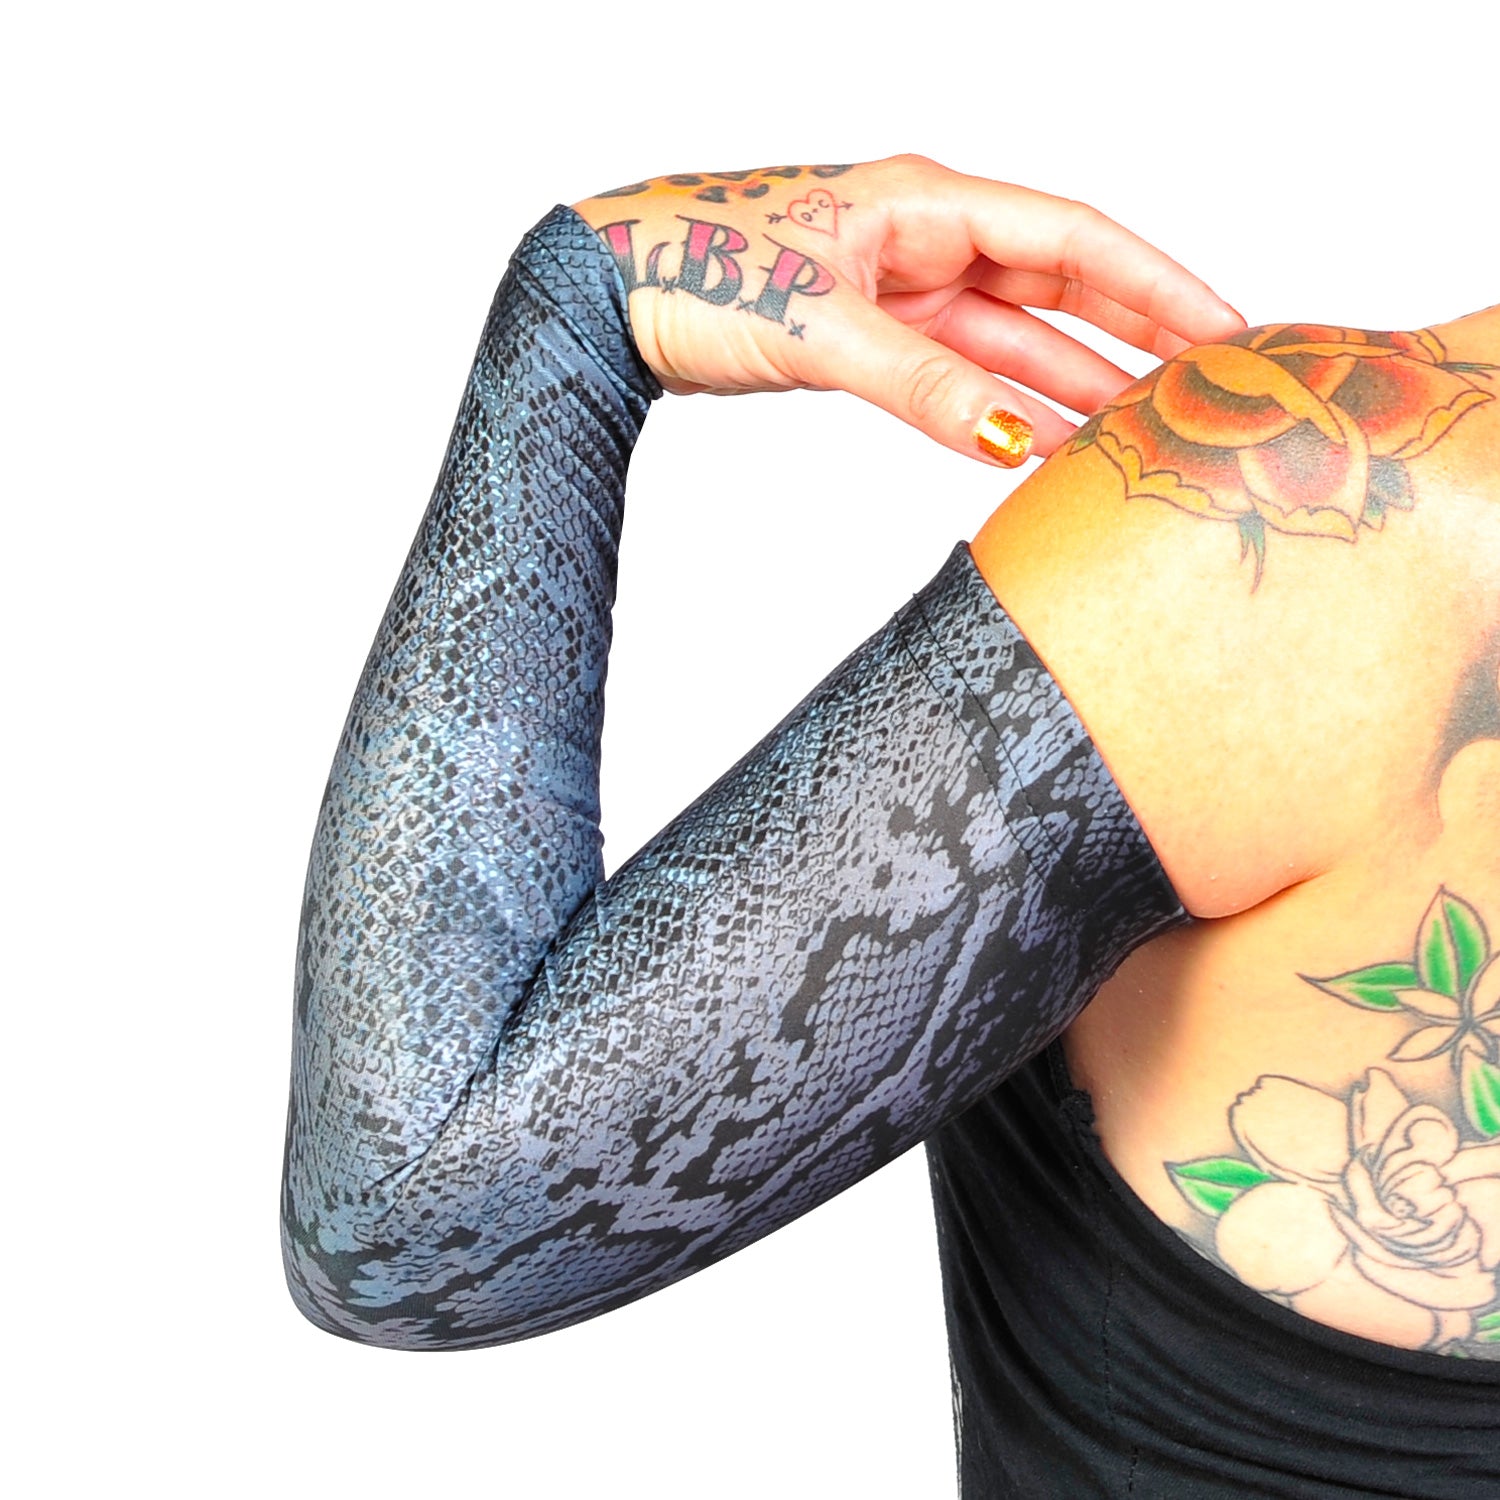 Considering a Sleeve Tattoo Heres What You Need to Know